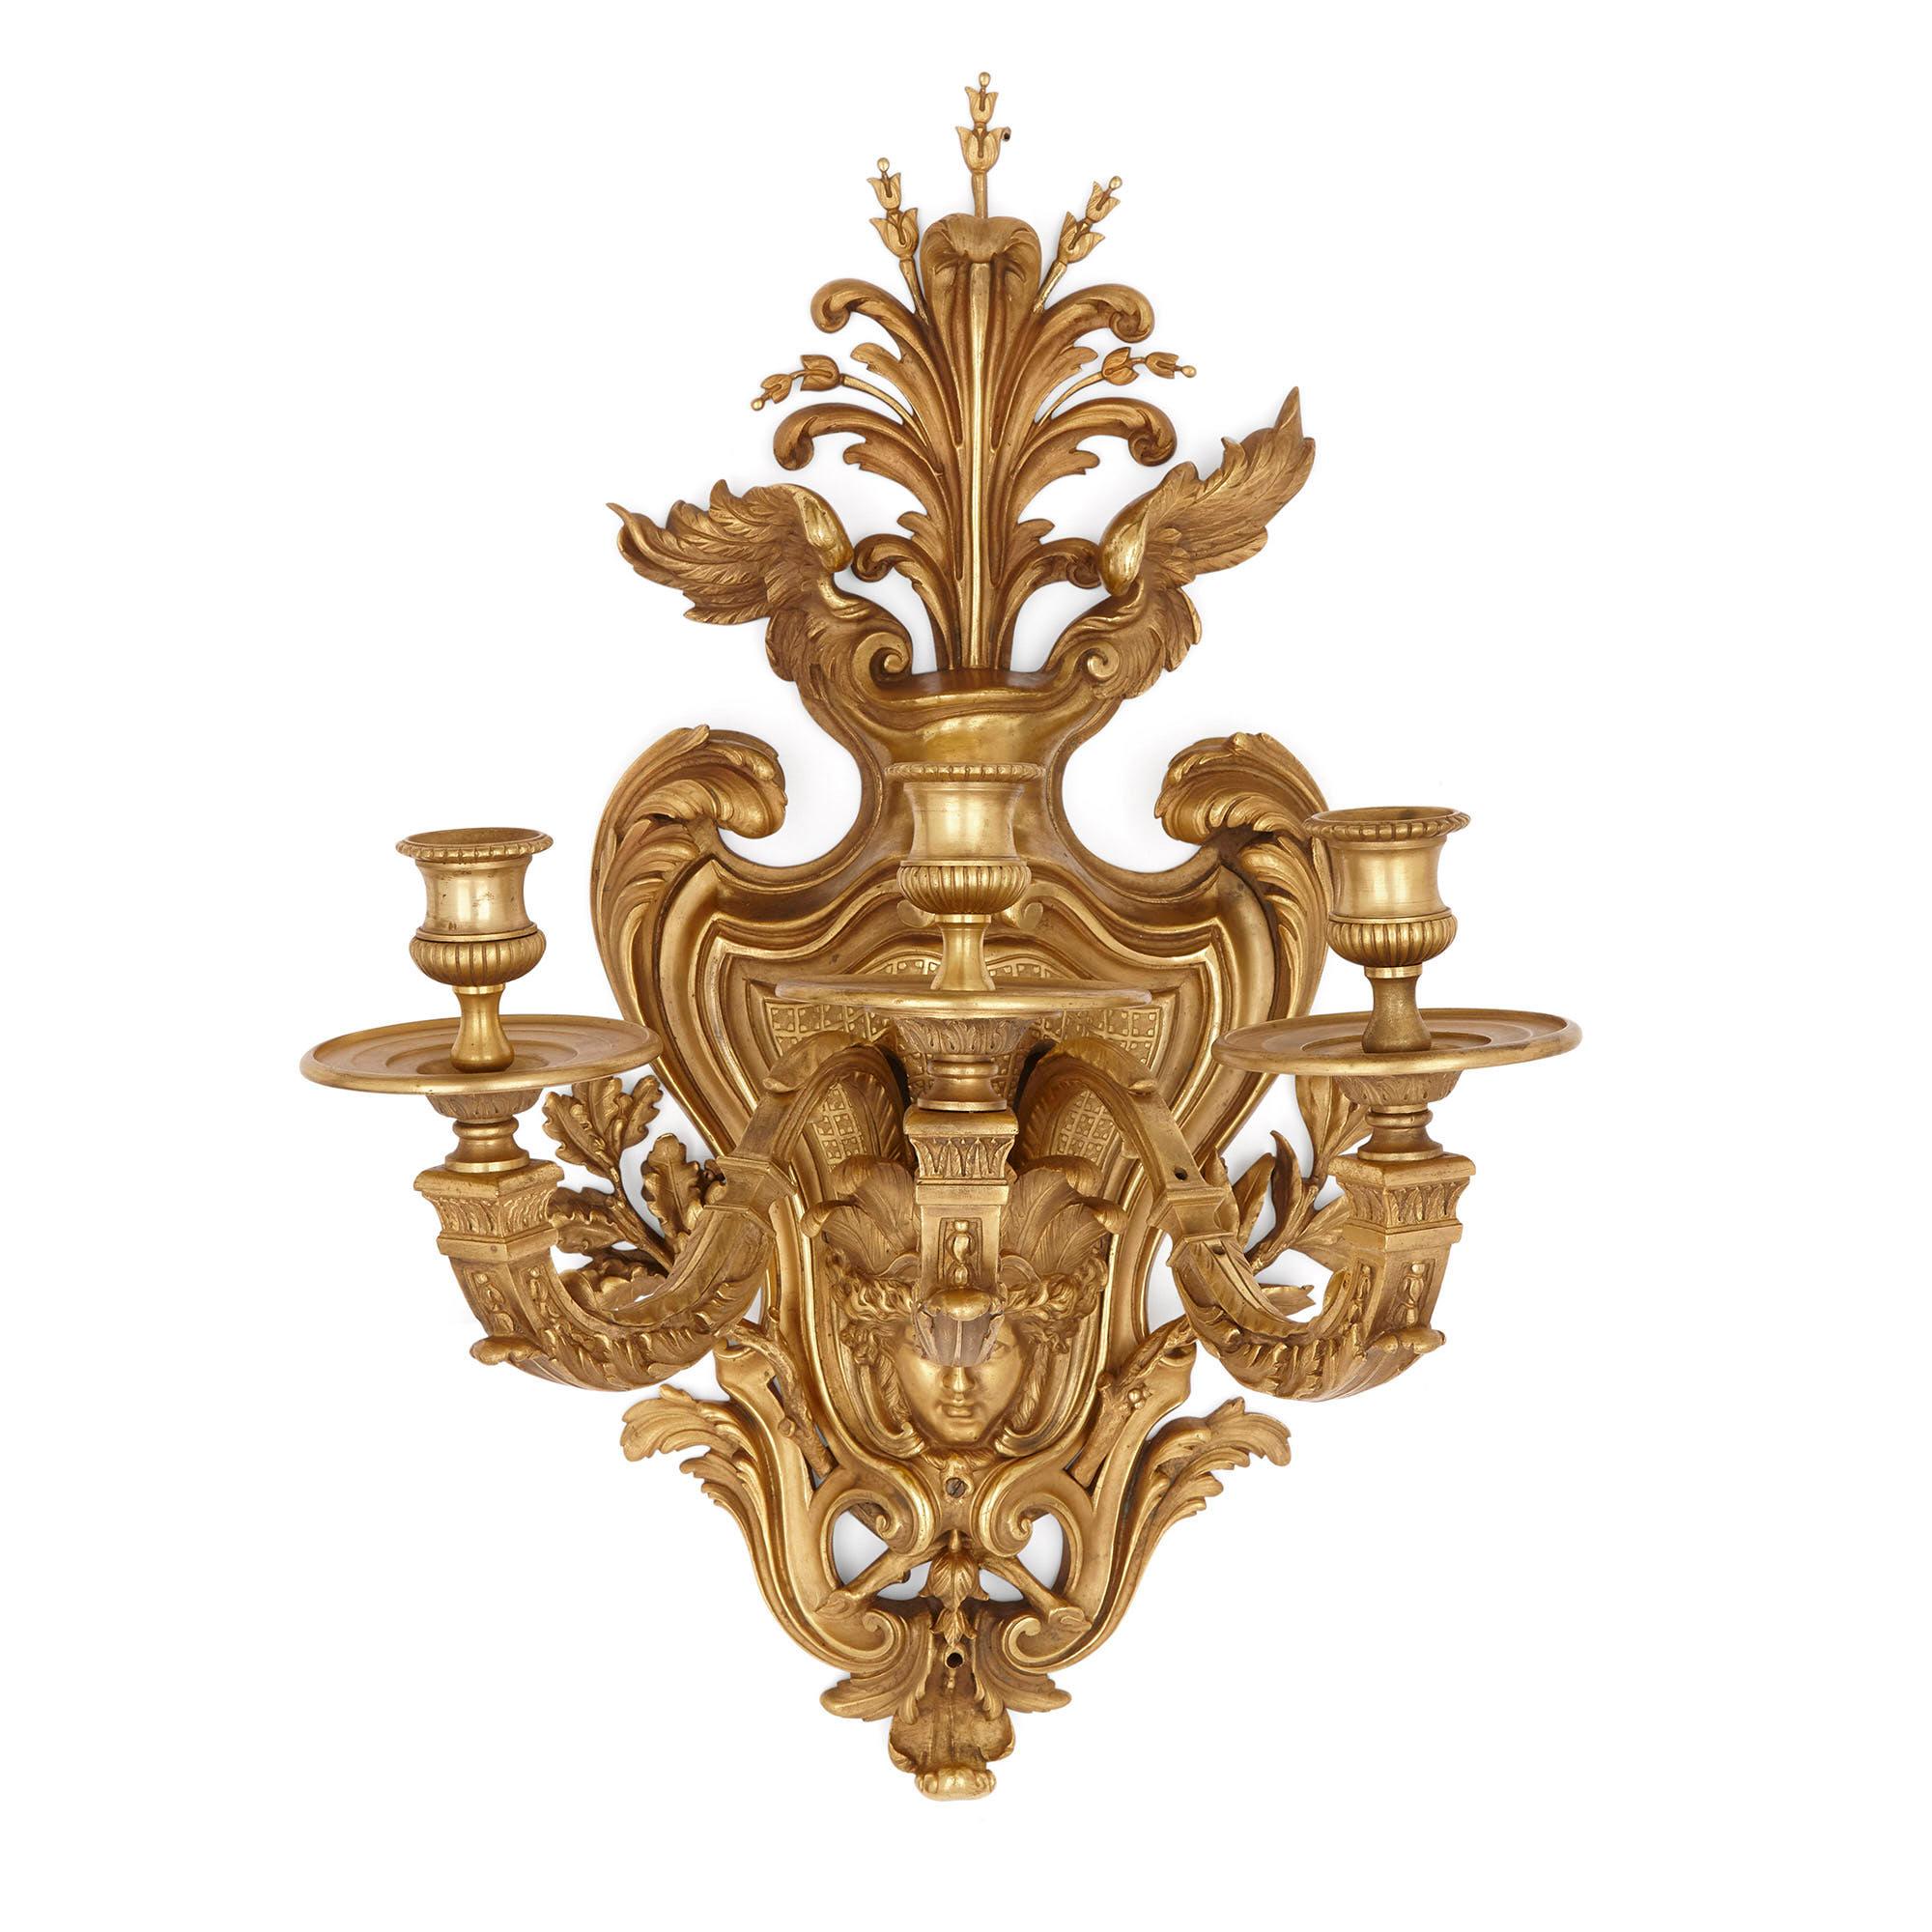 Pair of large gilt bronze sconces in the Régence style
French, circa 1880
Measures: Height 77cm, width 52cm, depth 40cm

This superb pair of gilt bronze sconces is wrought in the Régence style, evincing qualities of both the Baroque and the